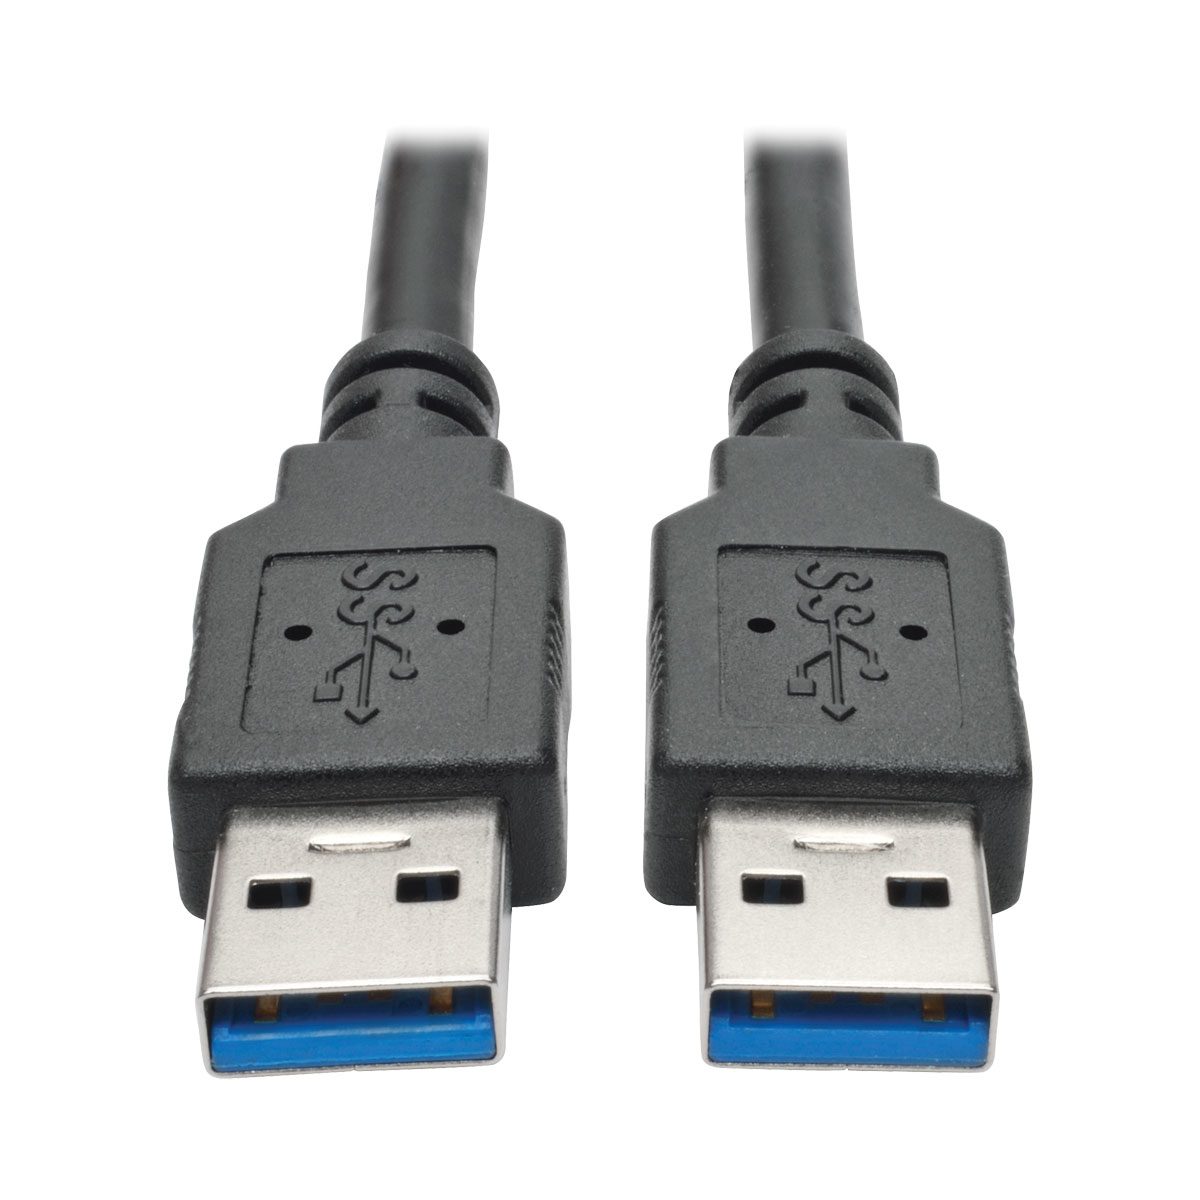 Cable Usb 3.0 Superspeed A/A M/M Negro 1.83 M Ã¬6 Pies+